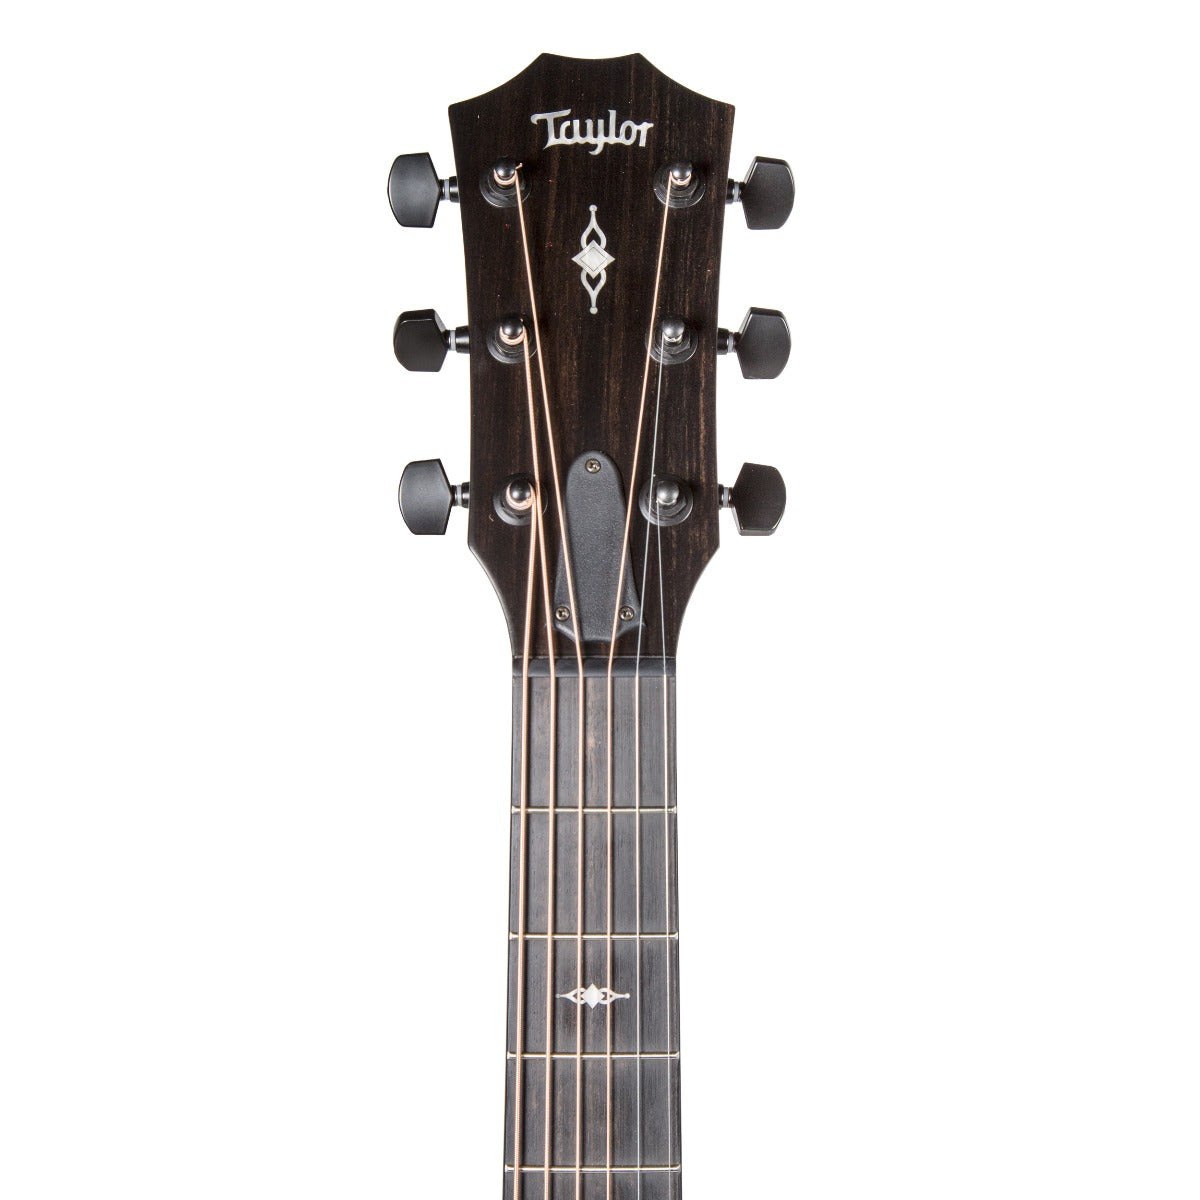 Taylor 327E Grand Pacific Shaded Edgeburst Acoustic Electric Guitar